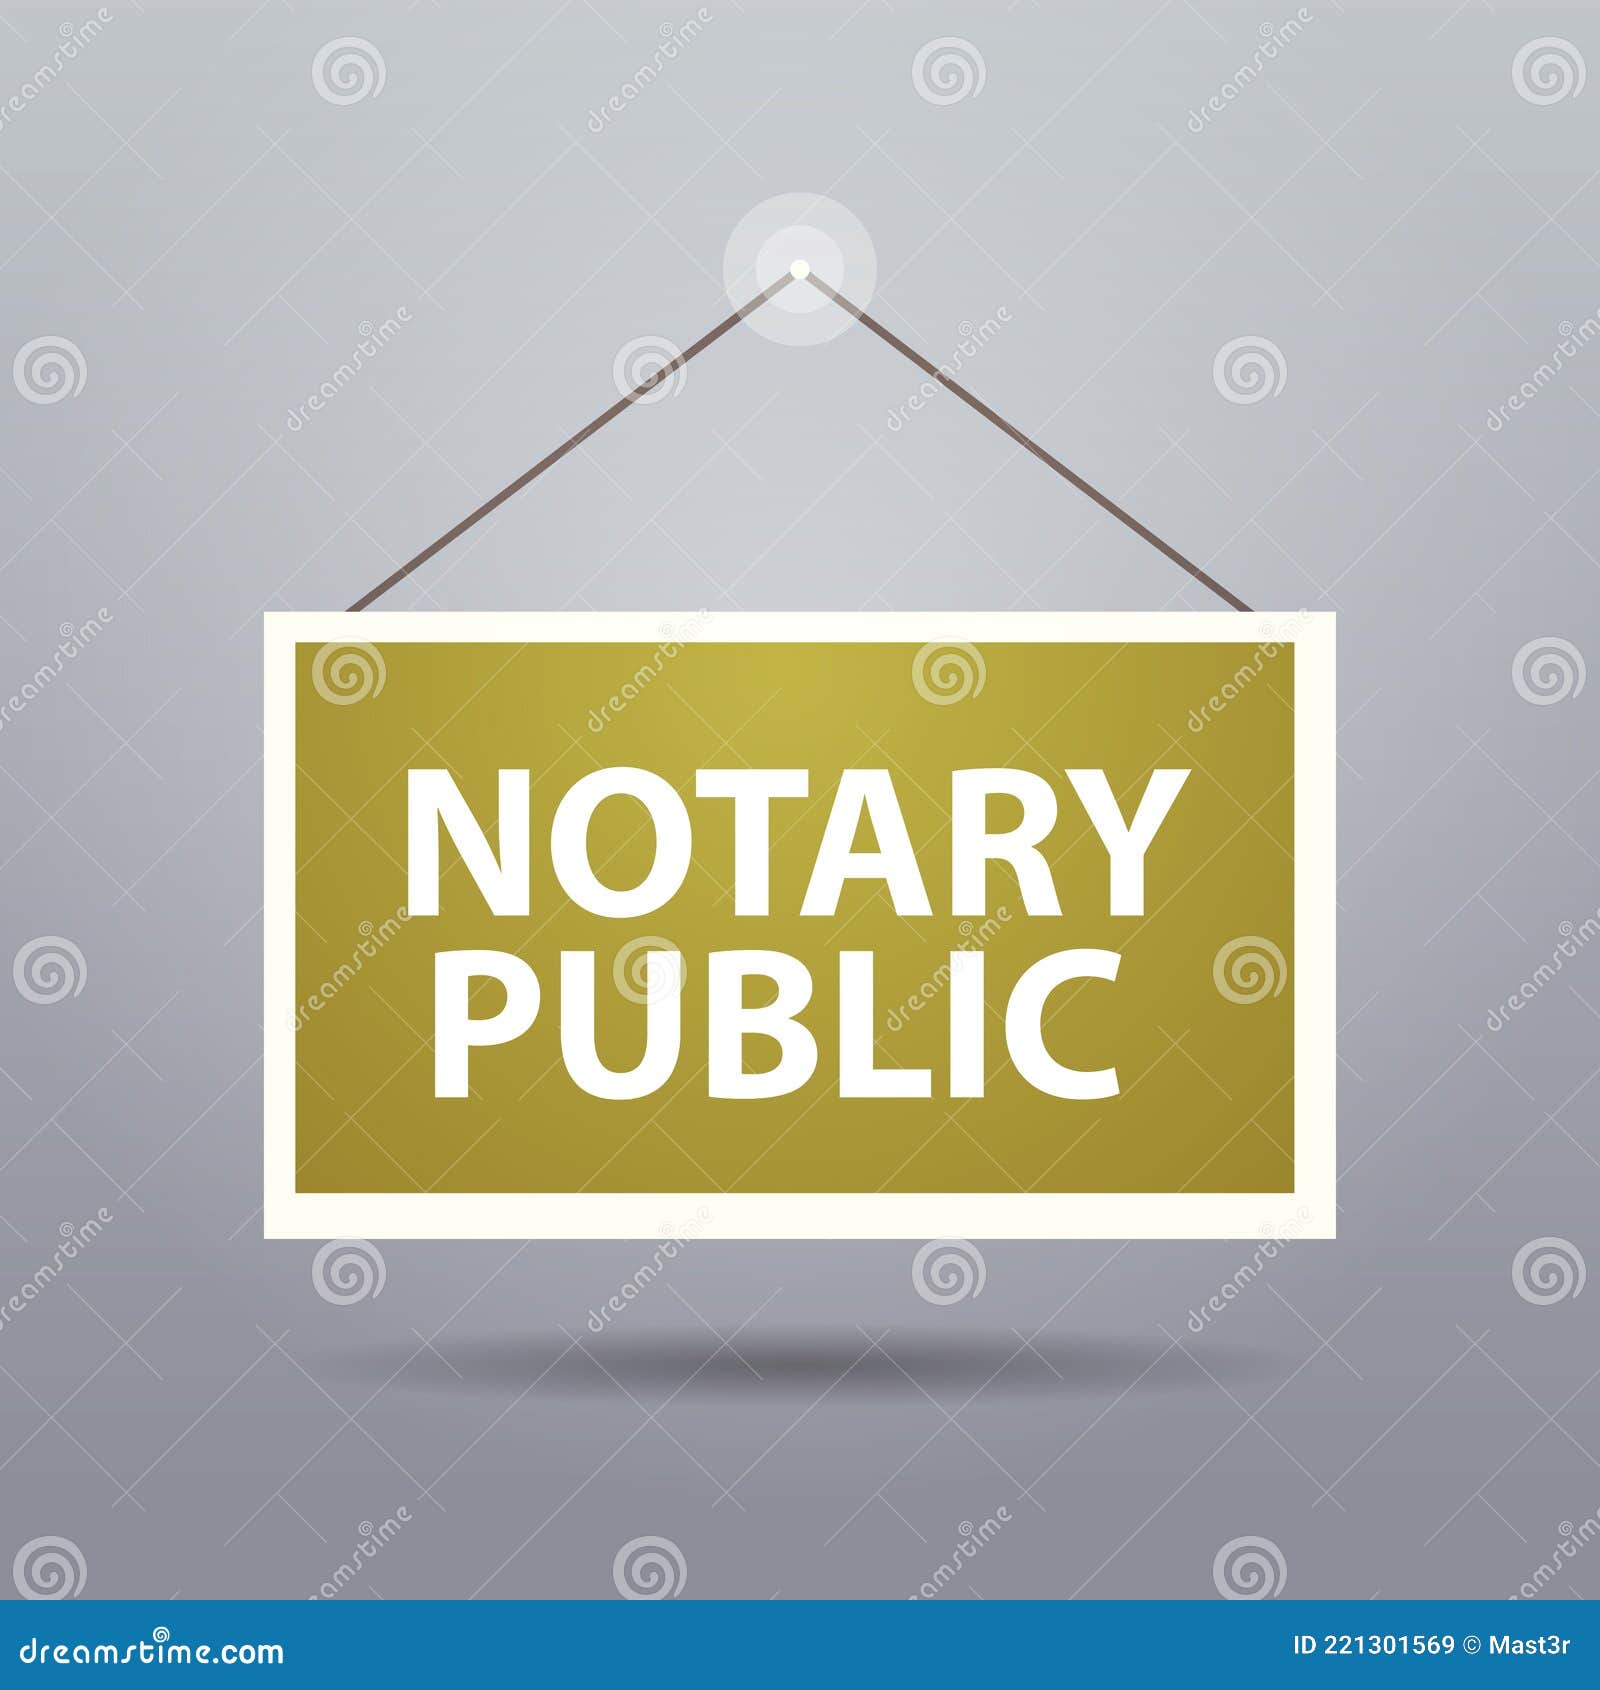 advertising sign hanging door notary public web banner signing and legalization documents concept